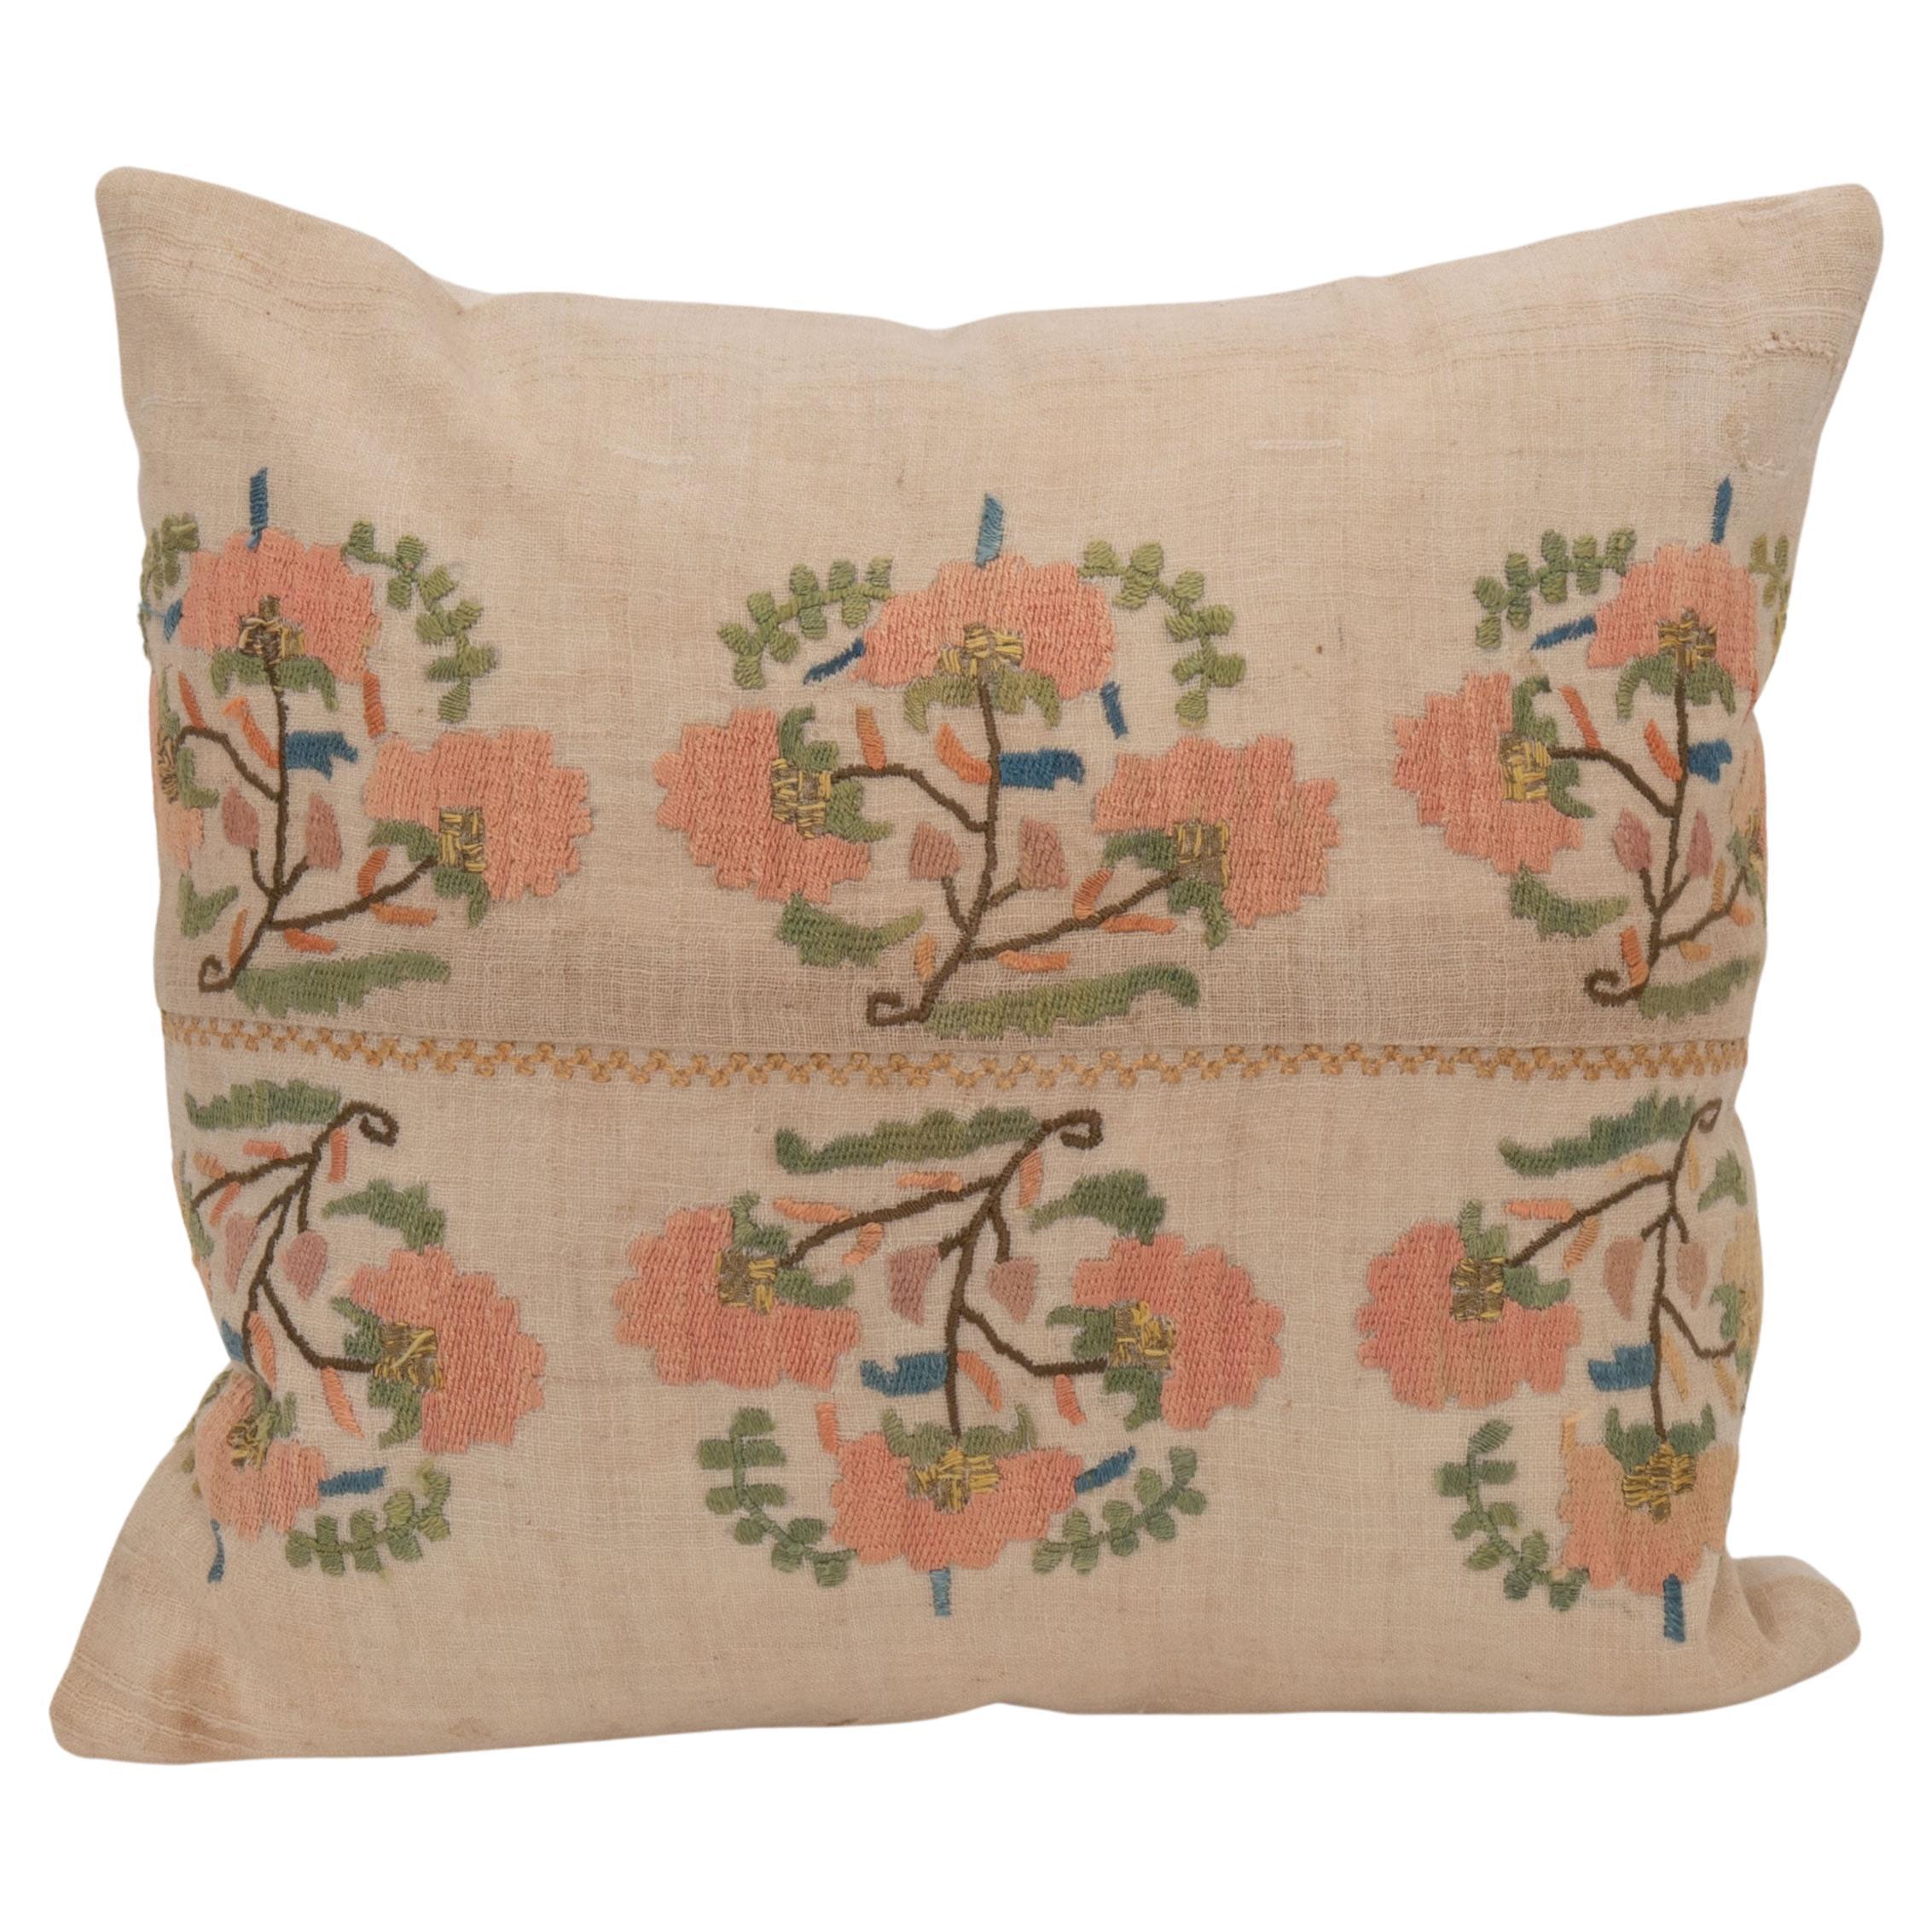 Pillow Case Made from an Antique Ottoman Embroidery For Sale